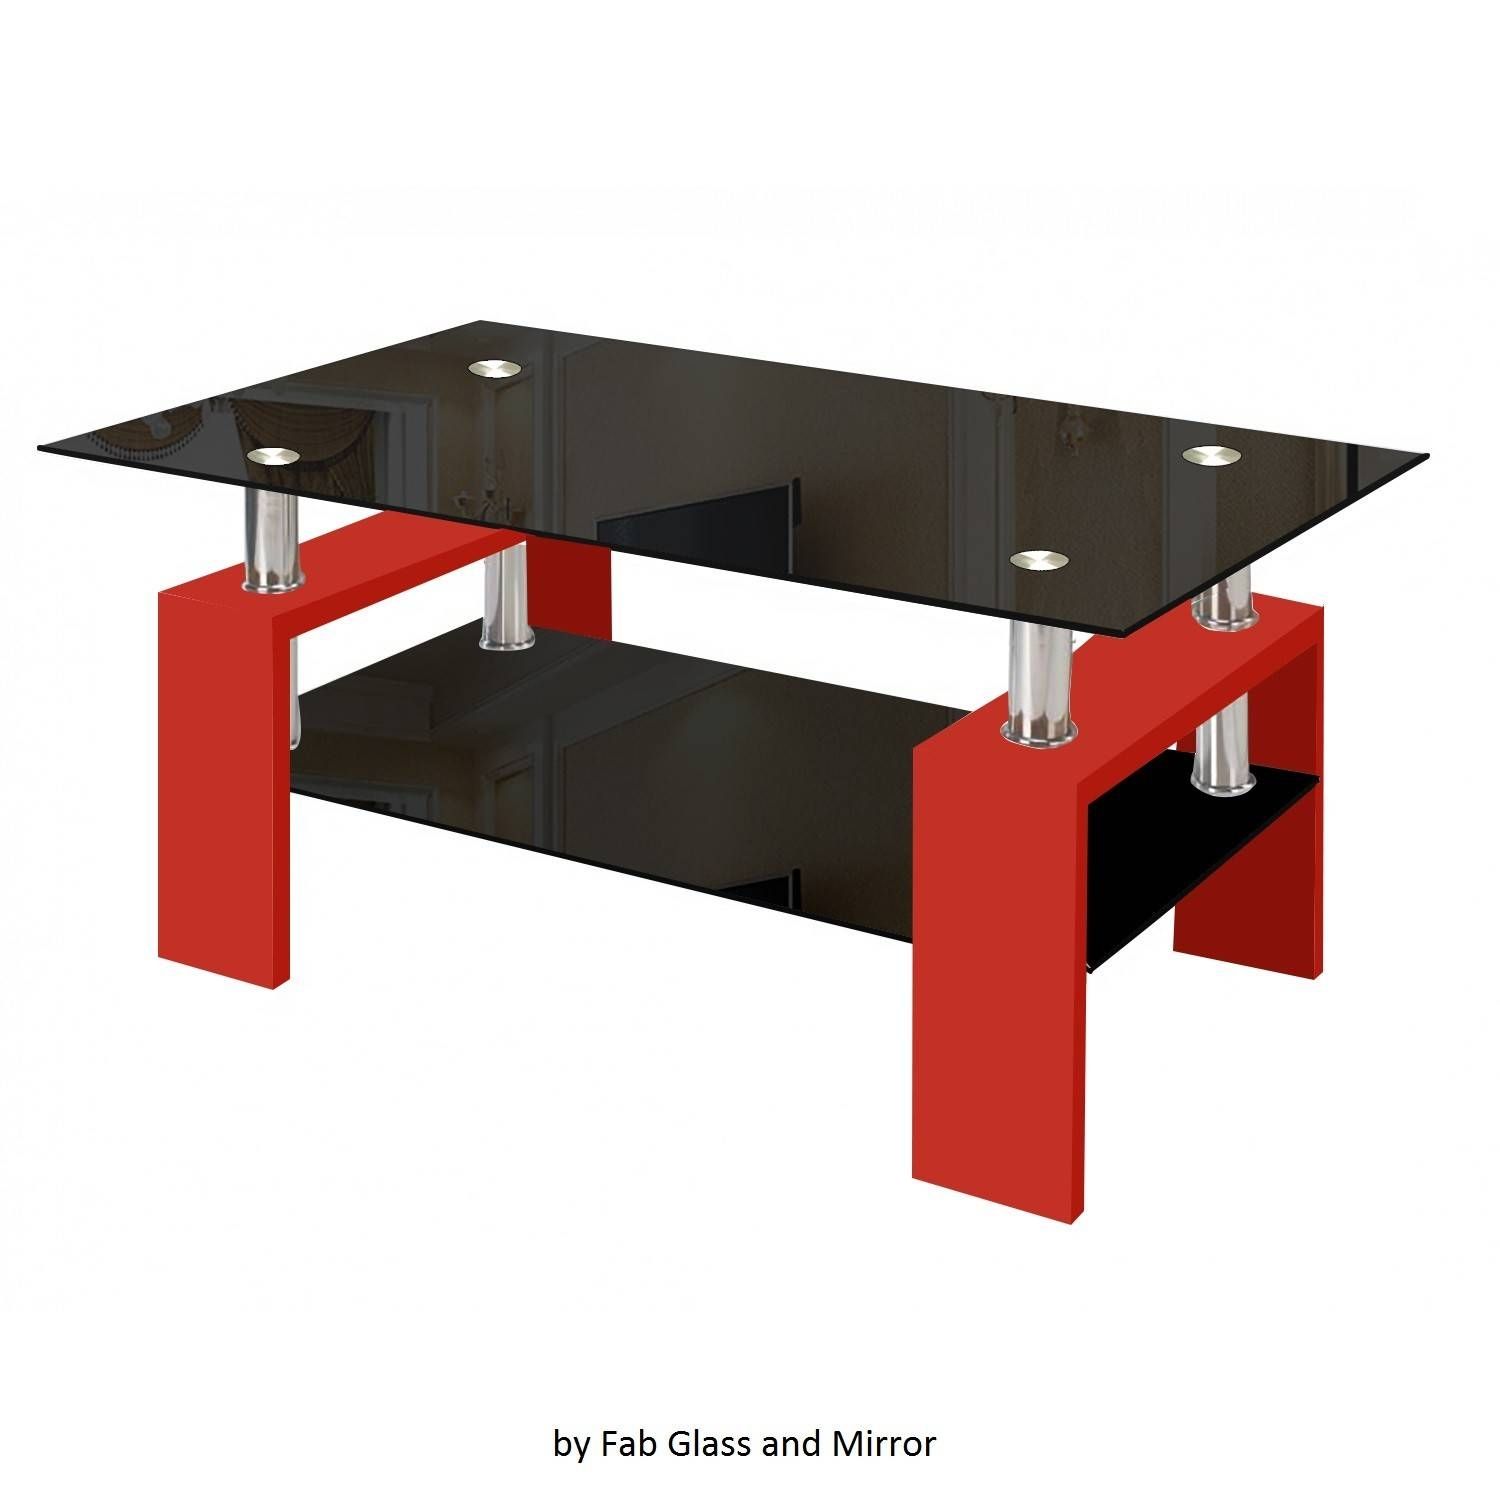 Fresh Contemporary Round Dining Table For 8 51 On Home Designing Throughout Round Red Coffee Tables (View 21 of 30)